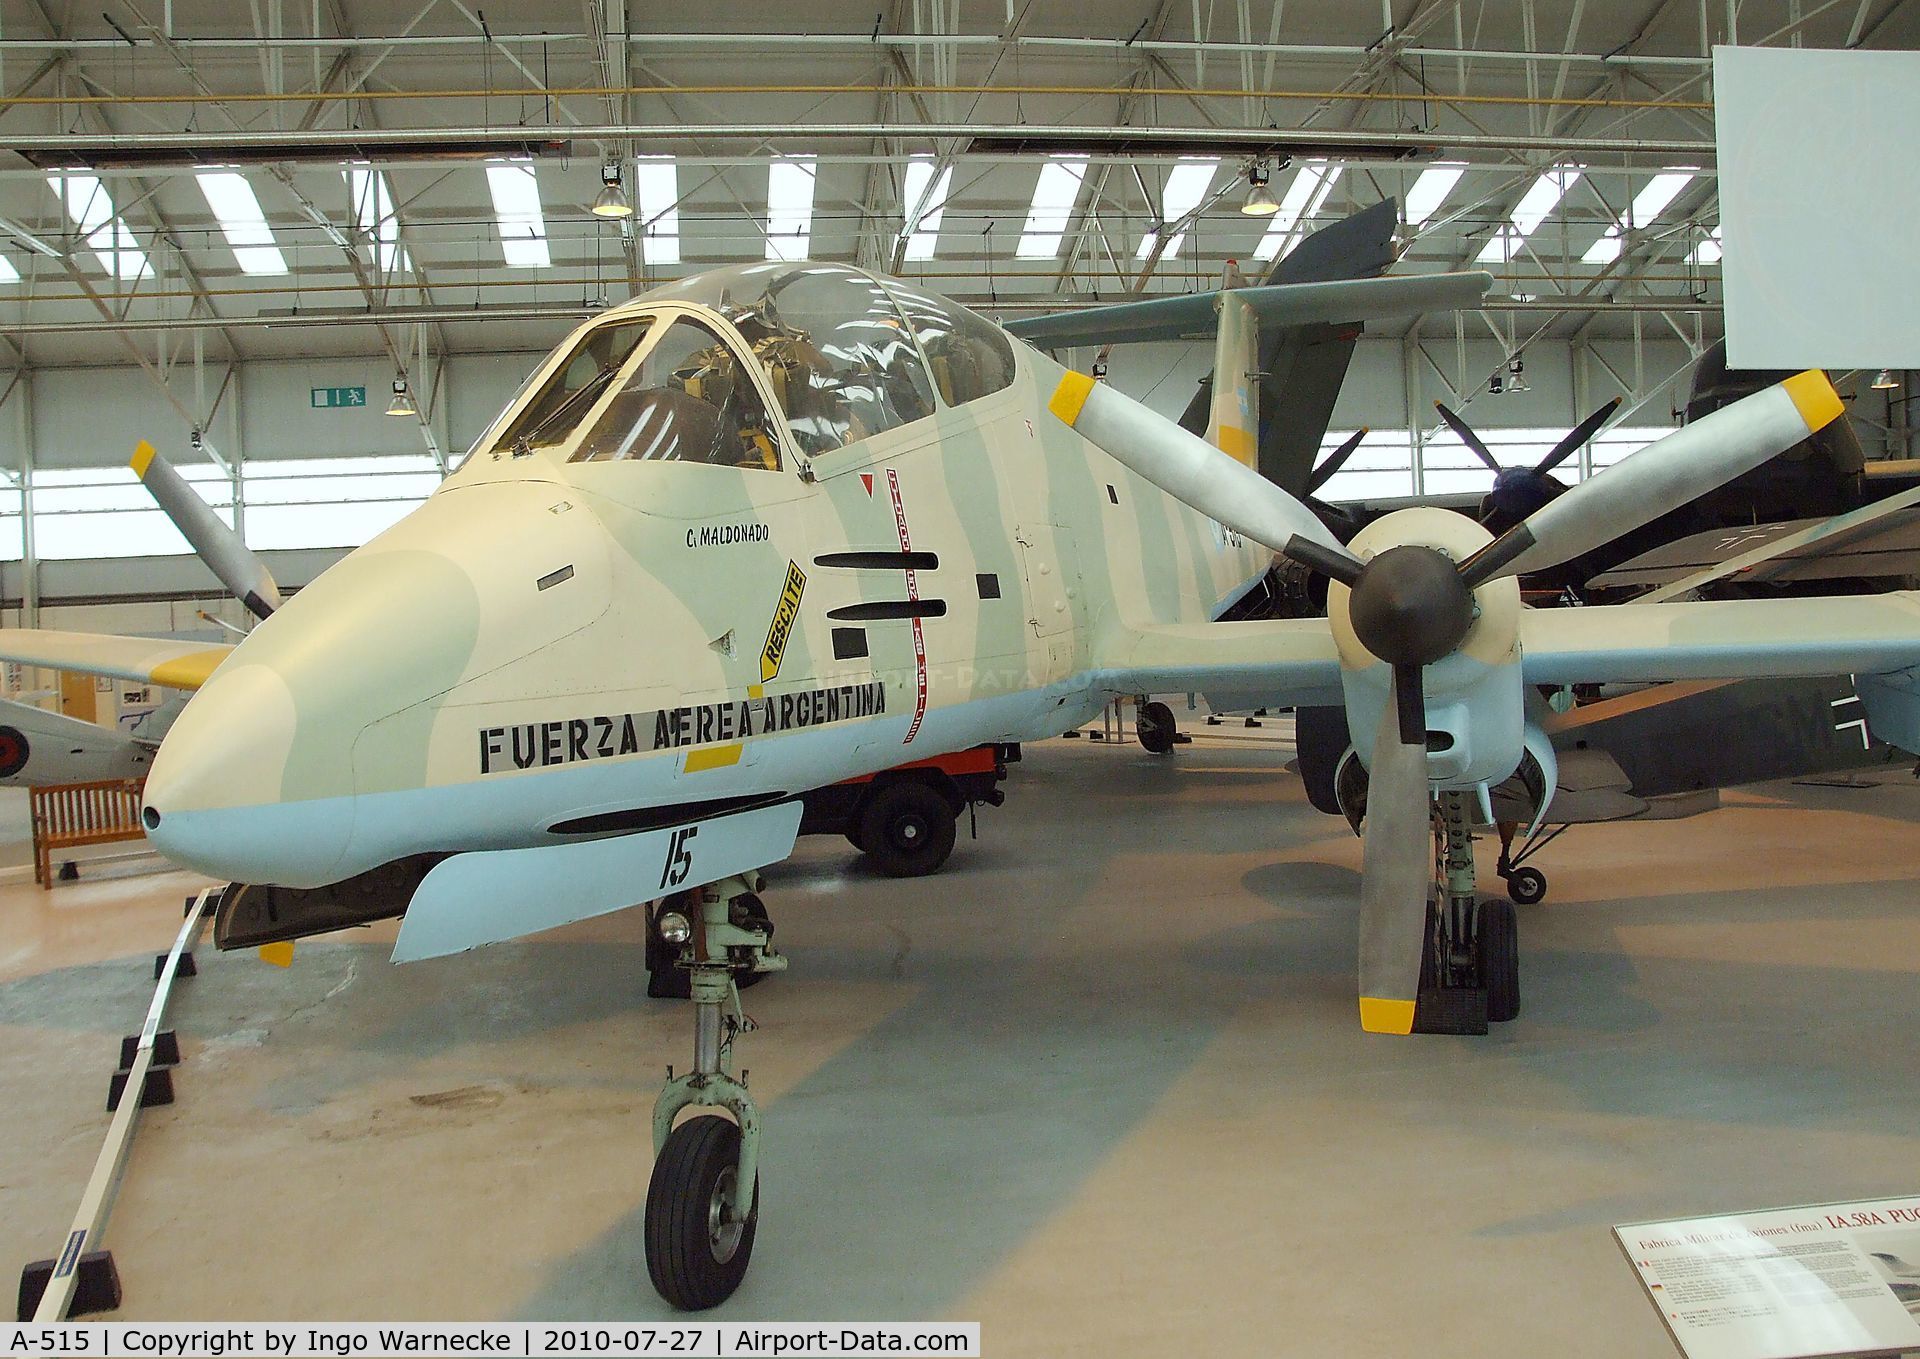 A-515, FMA IA-58A Pucará C/N 018, FMA IA-58A Pucara at the RAF Museum, Cosford